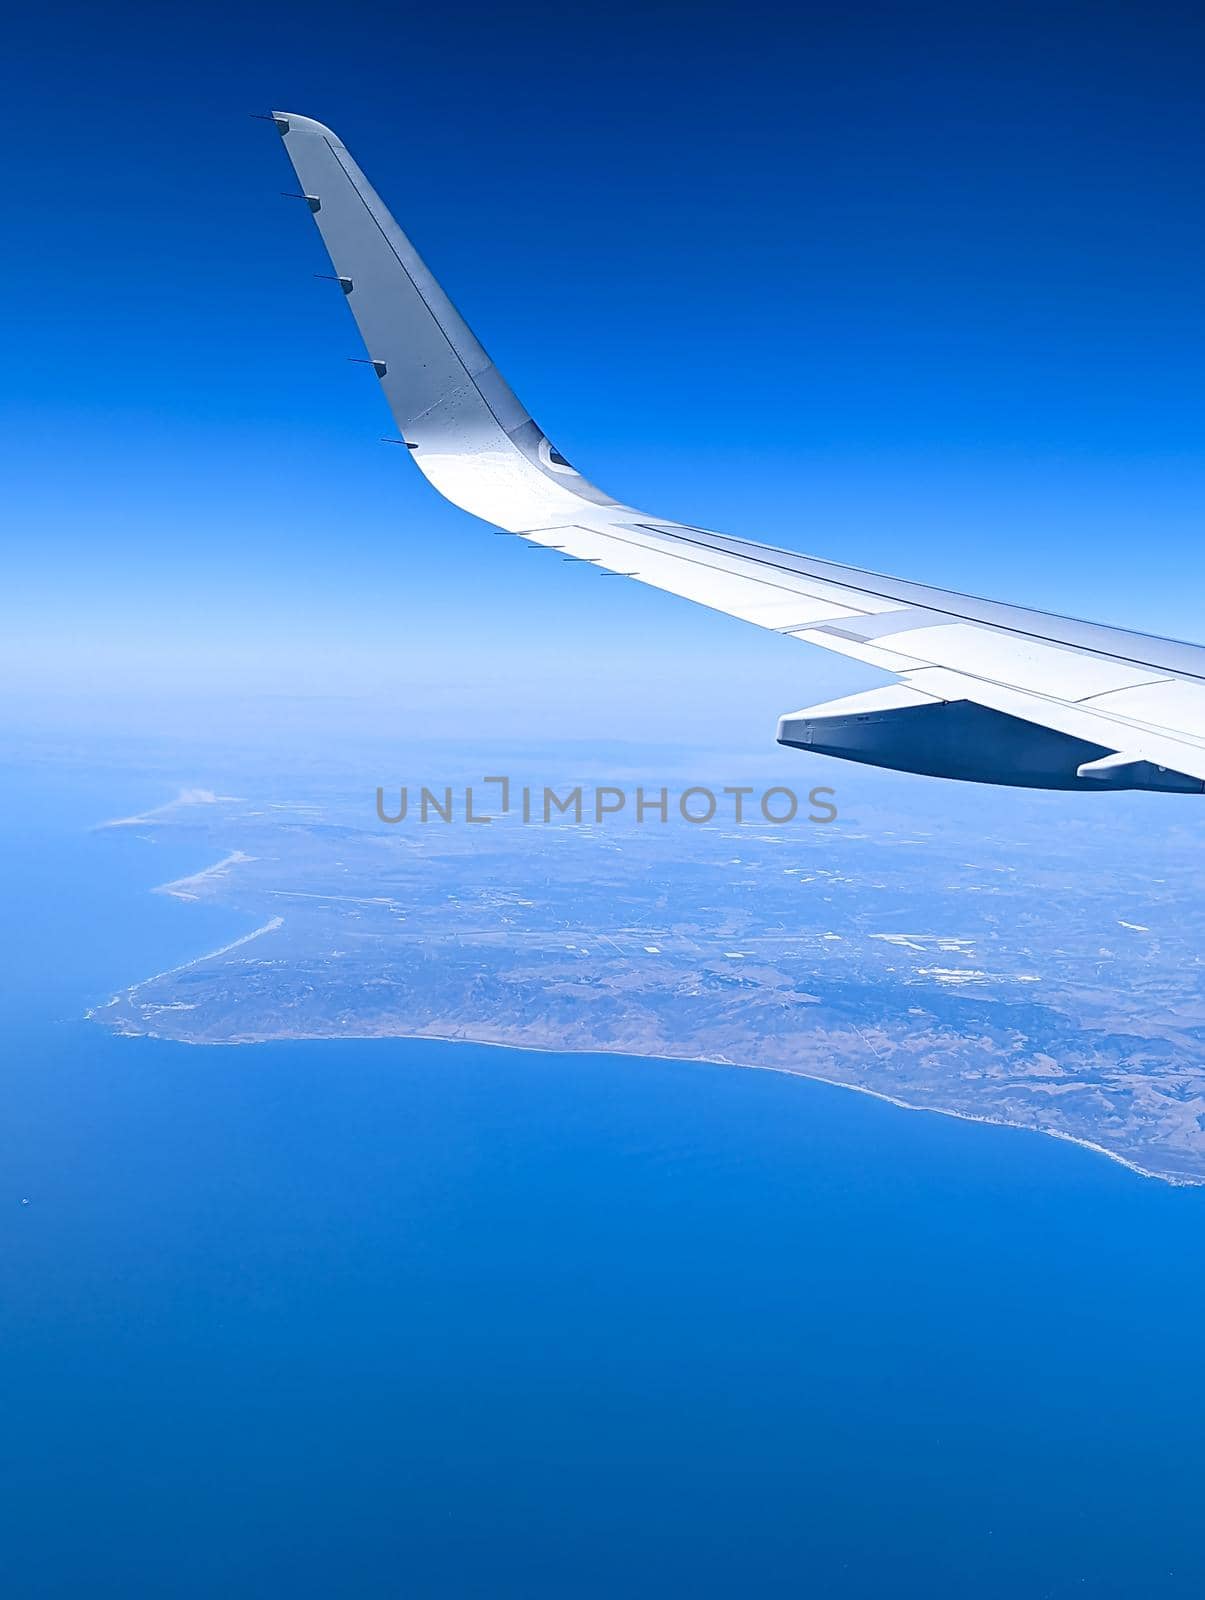 southern california coastline from an air plane